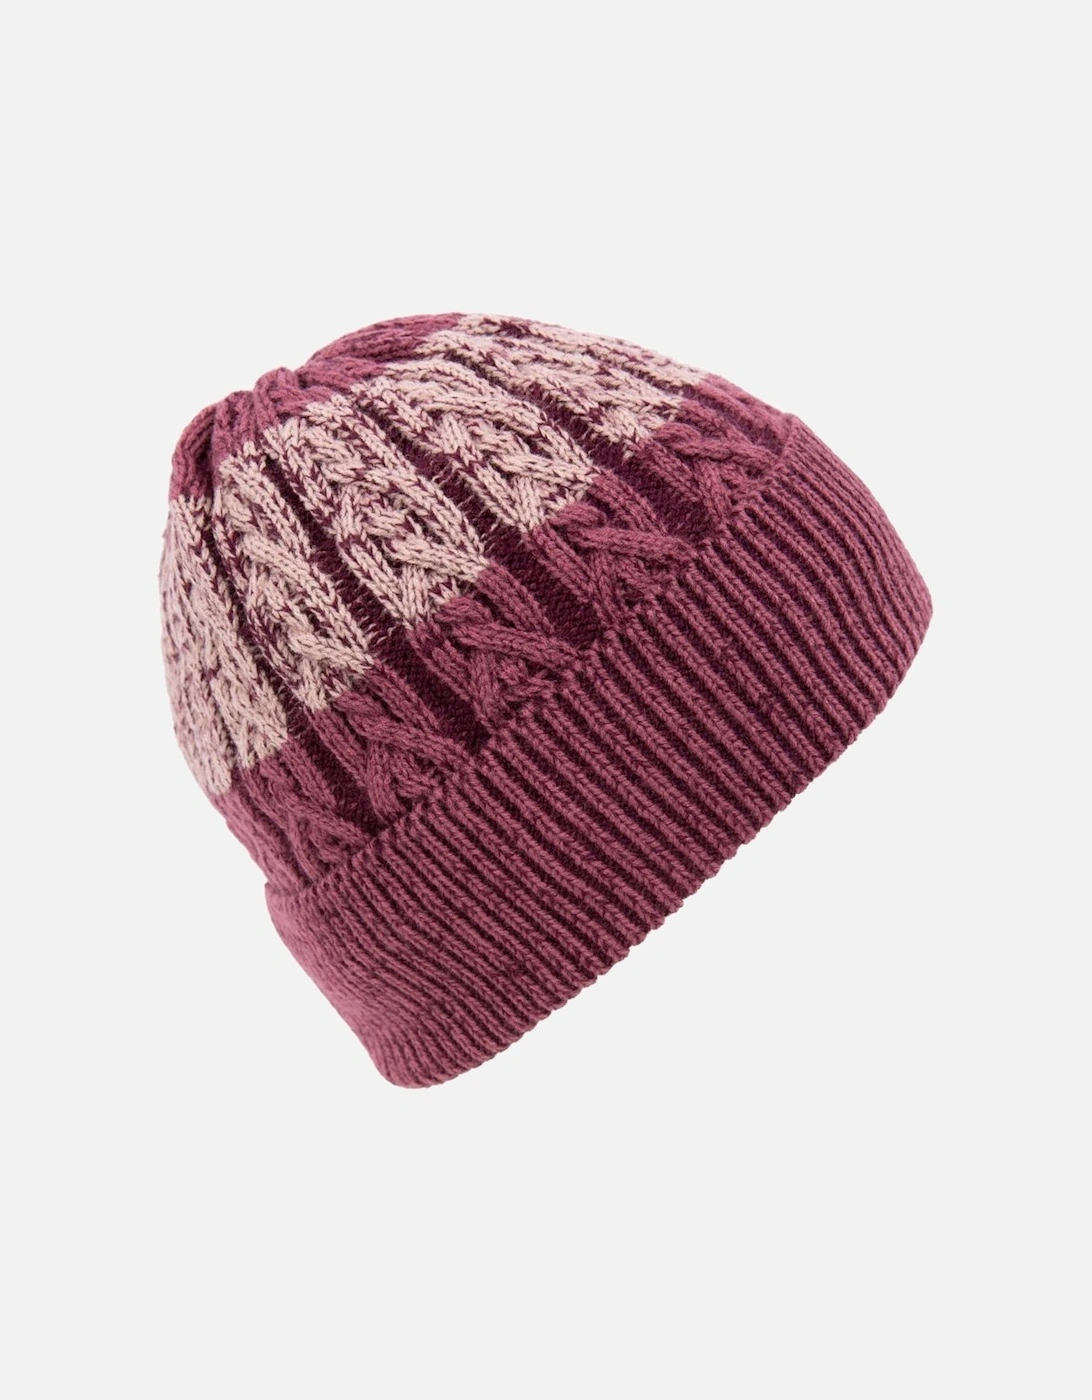 Womens/Ladies Zindy Knitted Beanie